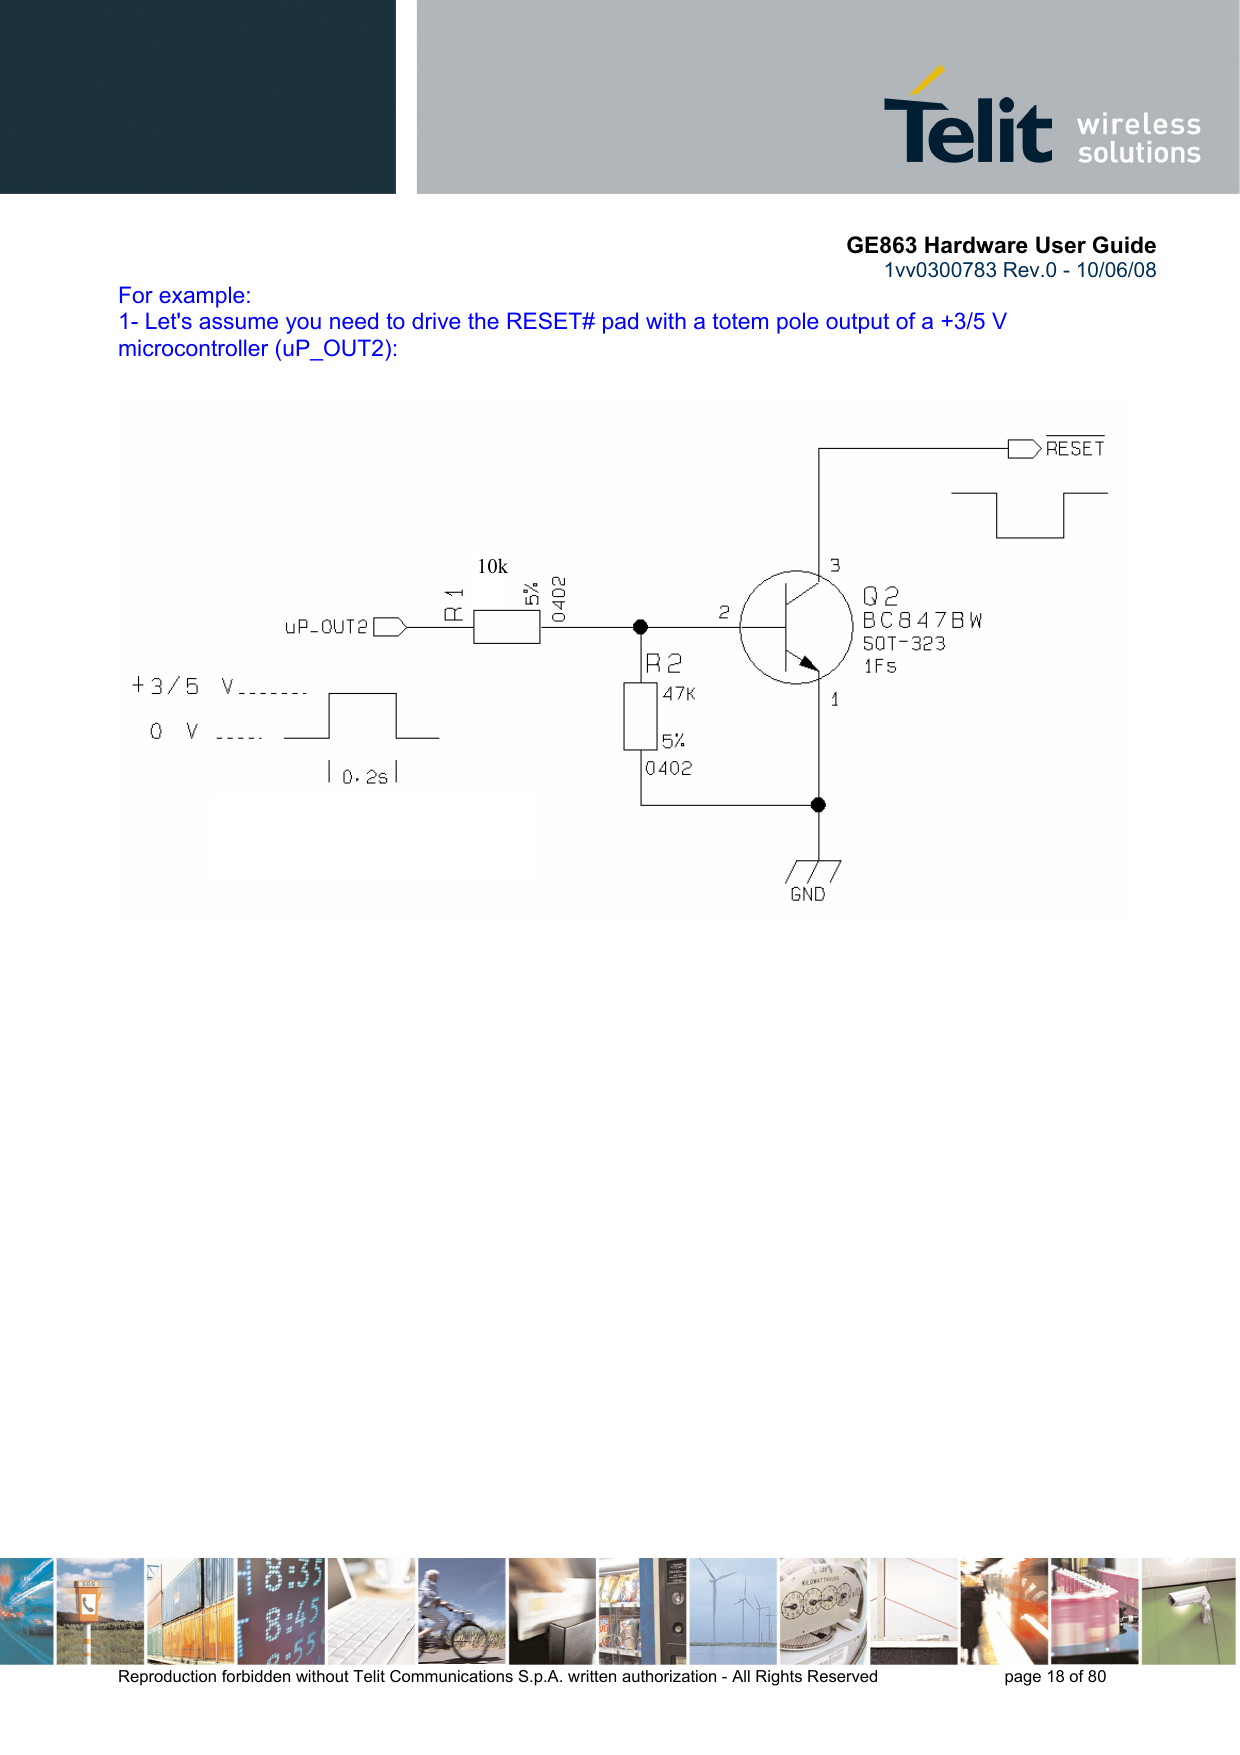       GE863 Hardware User Guide 1vv0300783 Rev.0 - 10/06/08 Reproduction forbidden without Telit Communications S.p.A. written authorization - All Rights Reserved    page 18 of 80  For example: 1- Let&apos;s assume you need to drive the RESET# pad with a totem pole output of a +3/5 V microcontroller (uP_OUT2):                                              10k  